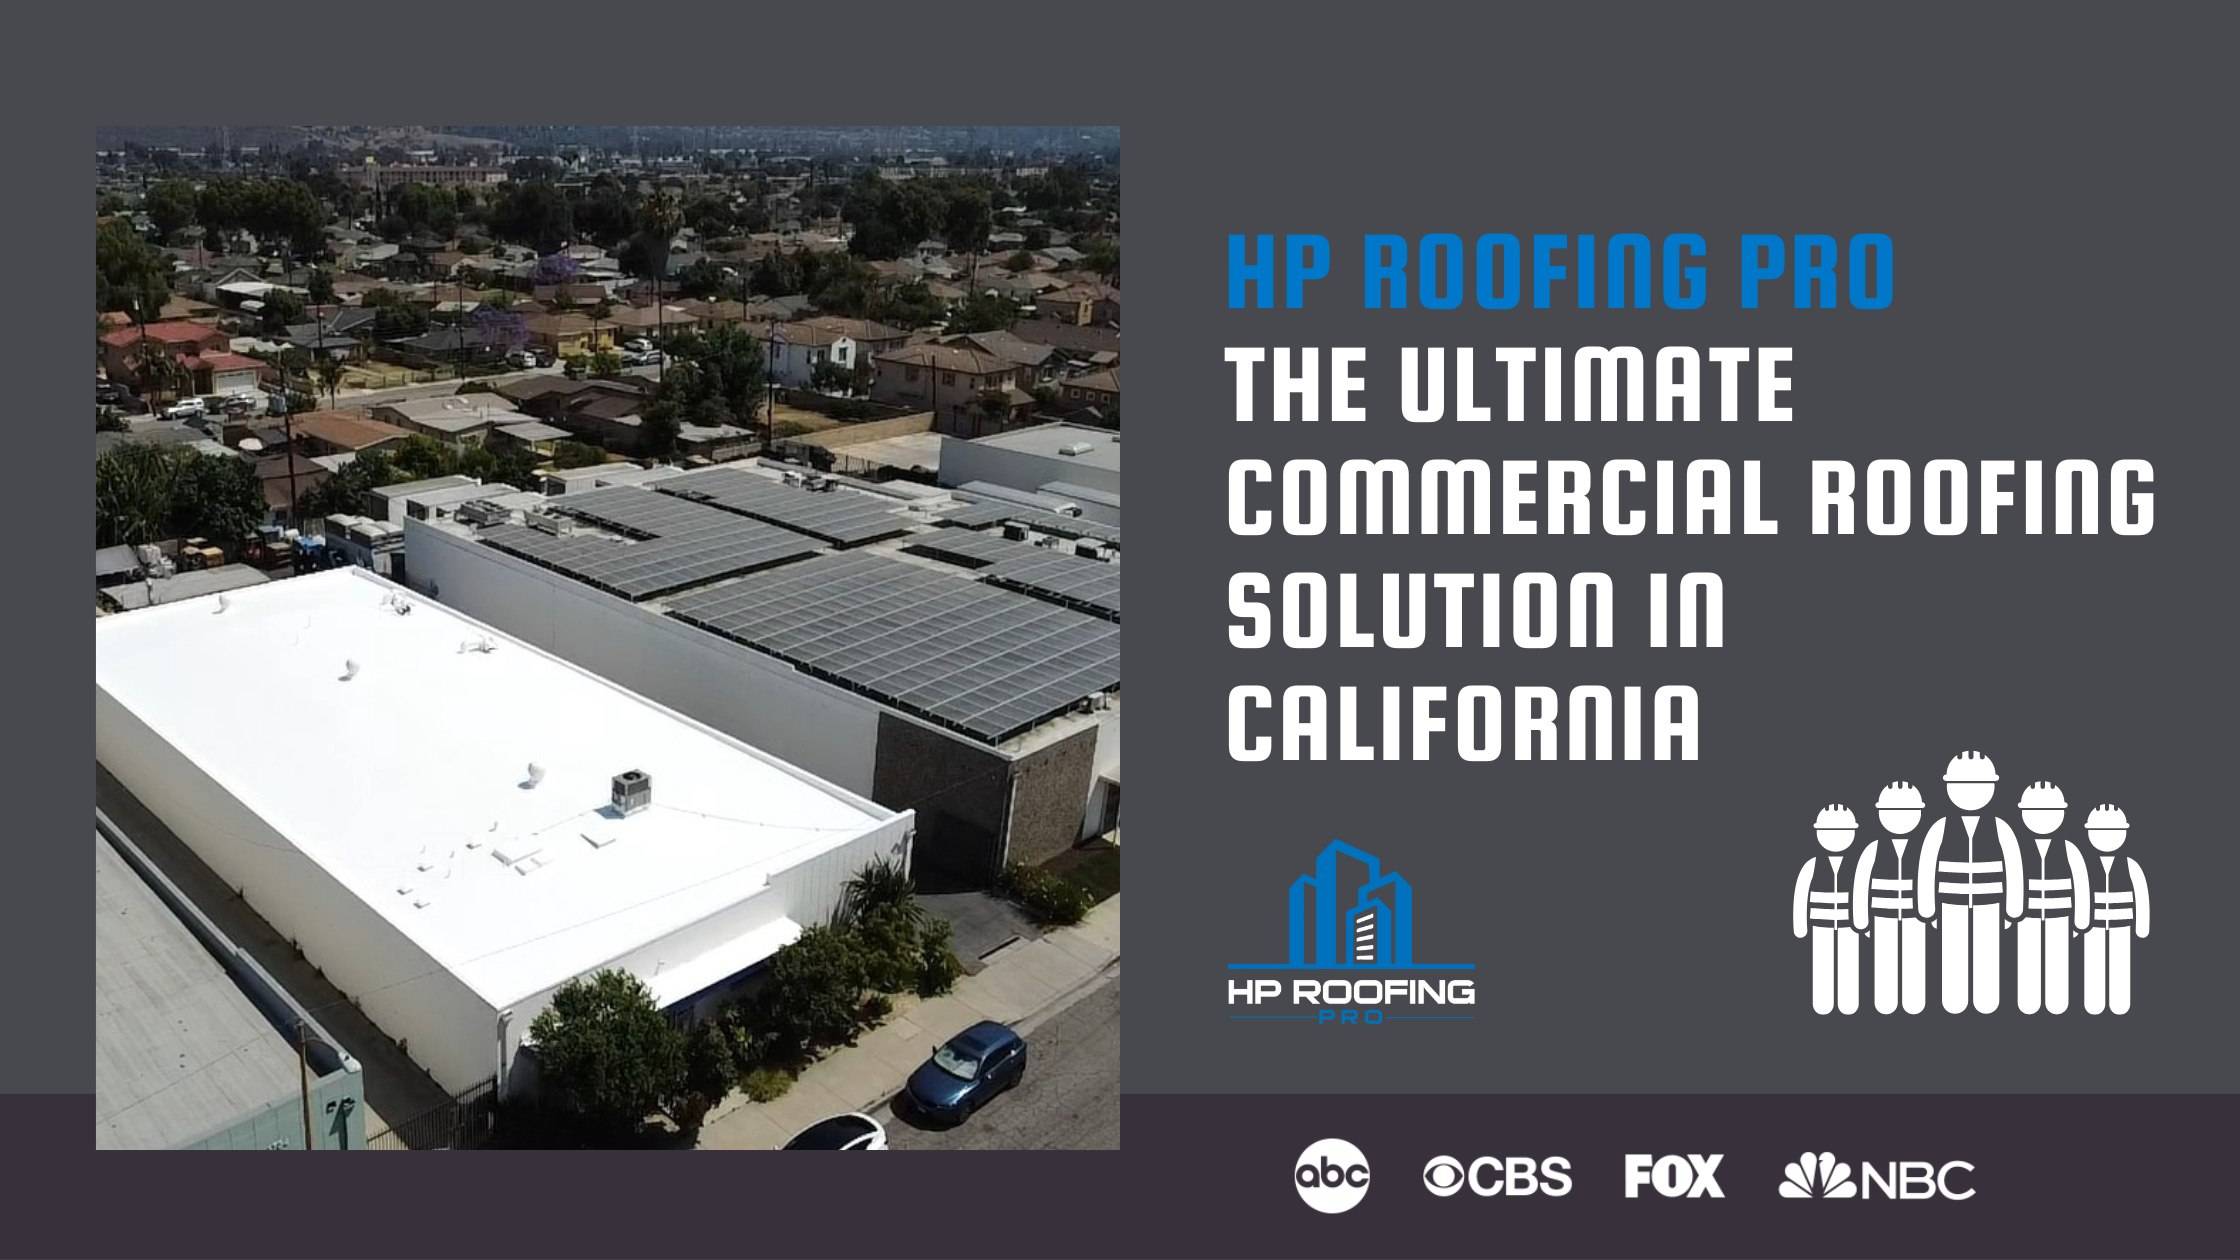 HP Roofing PRO: The Ultimate Commercial Roofing Solution in Los Angeles and Southern Califonia